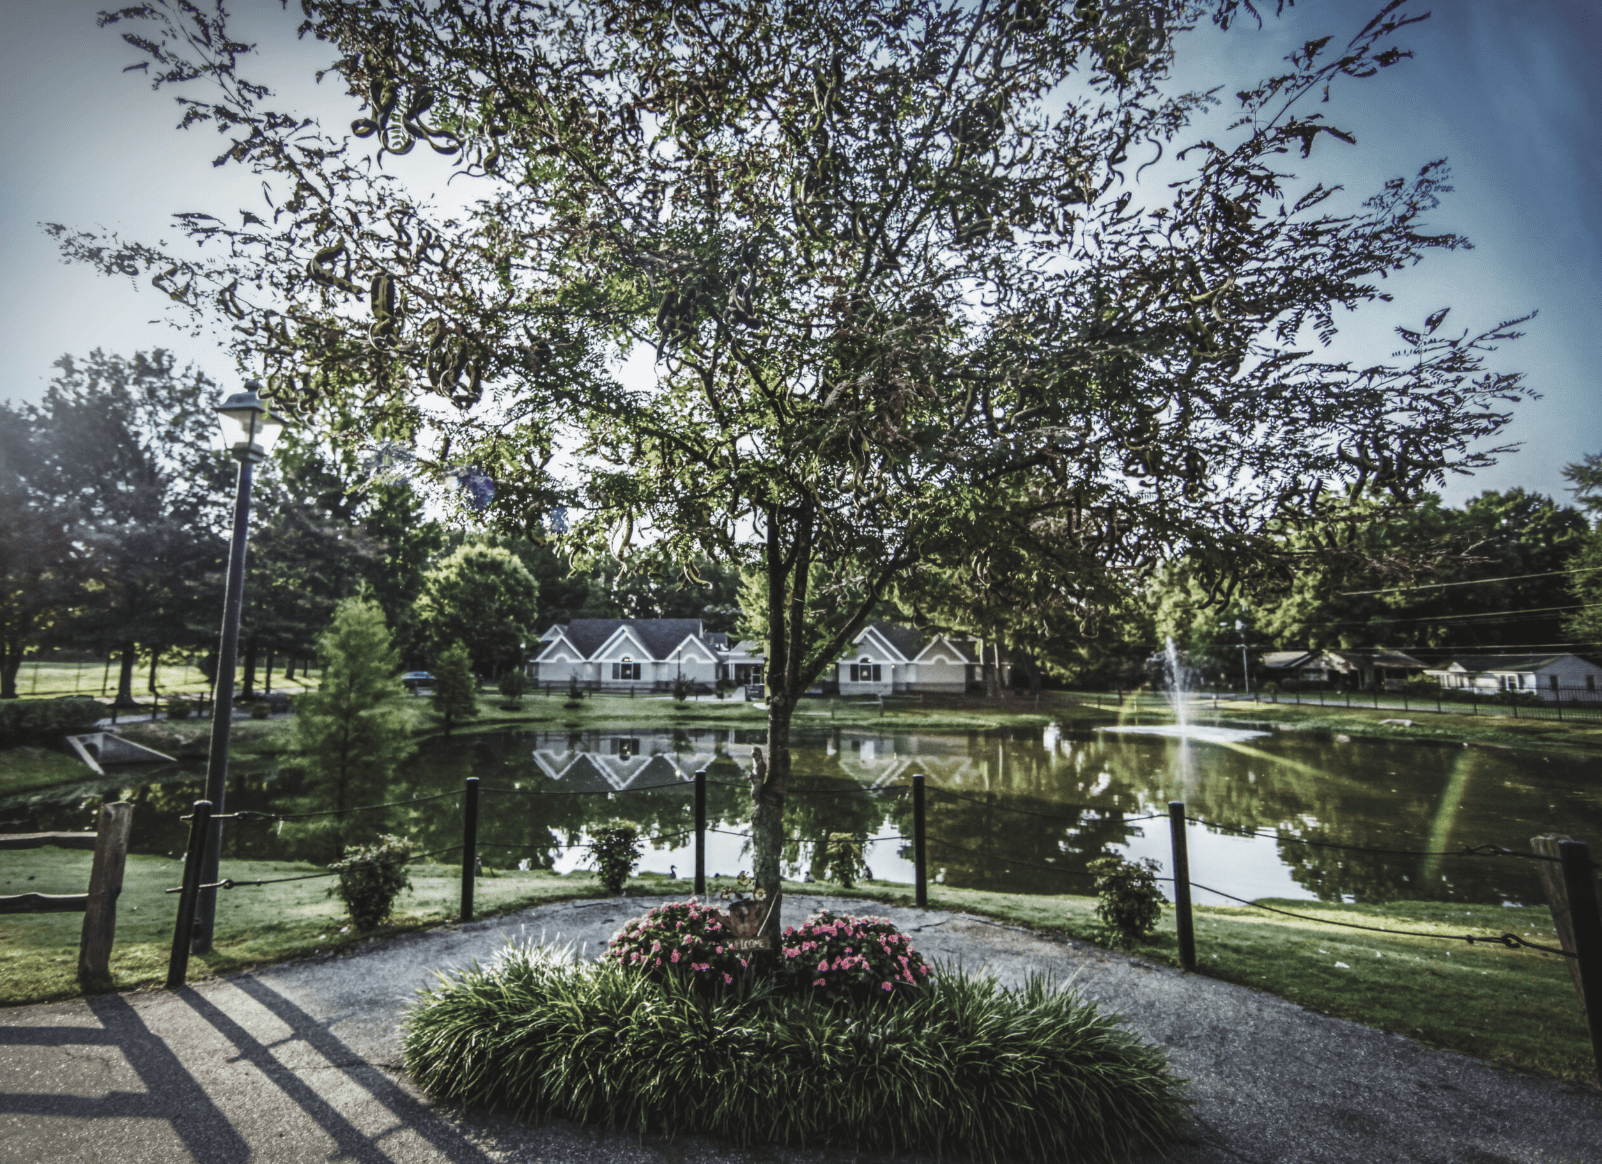 A view of the pond and one of the cottages at Foxbridge Senior Living.